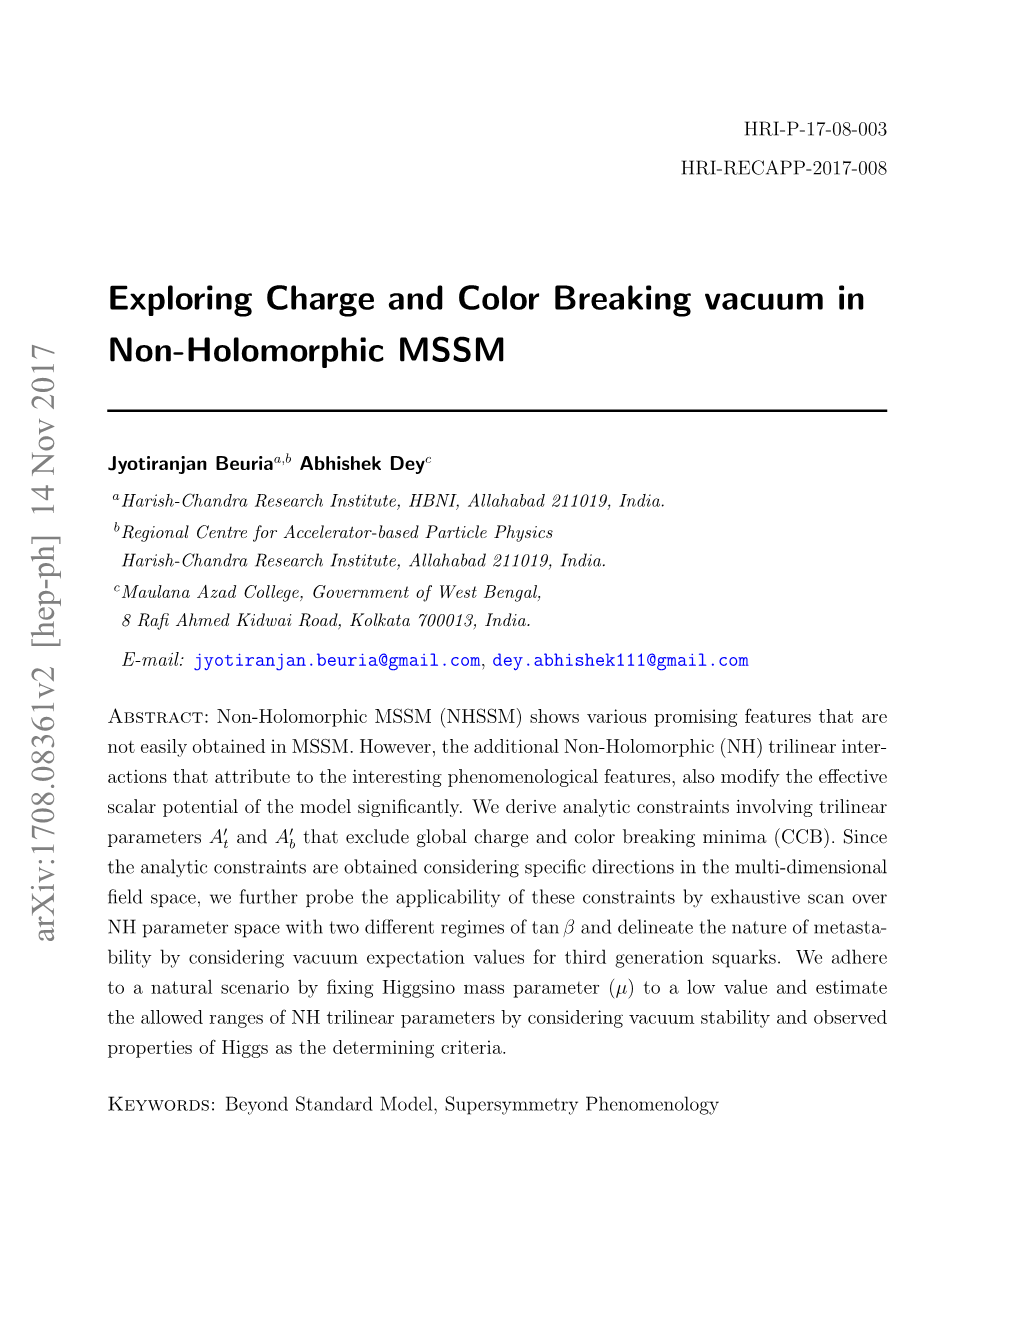 Exploring Charge and Color Breaking Vacuum in Non-Holomorphic MSSM